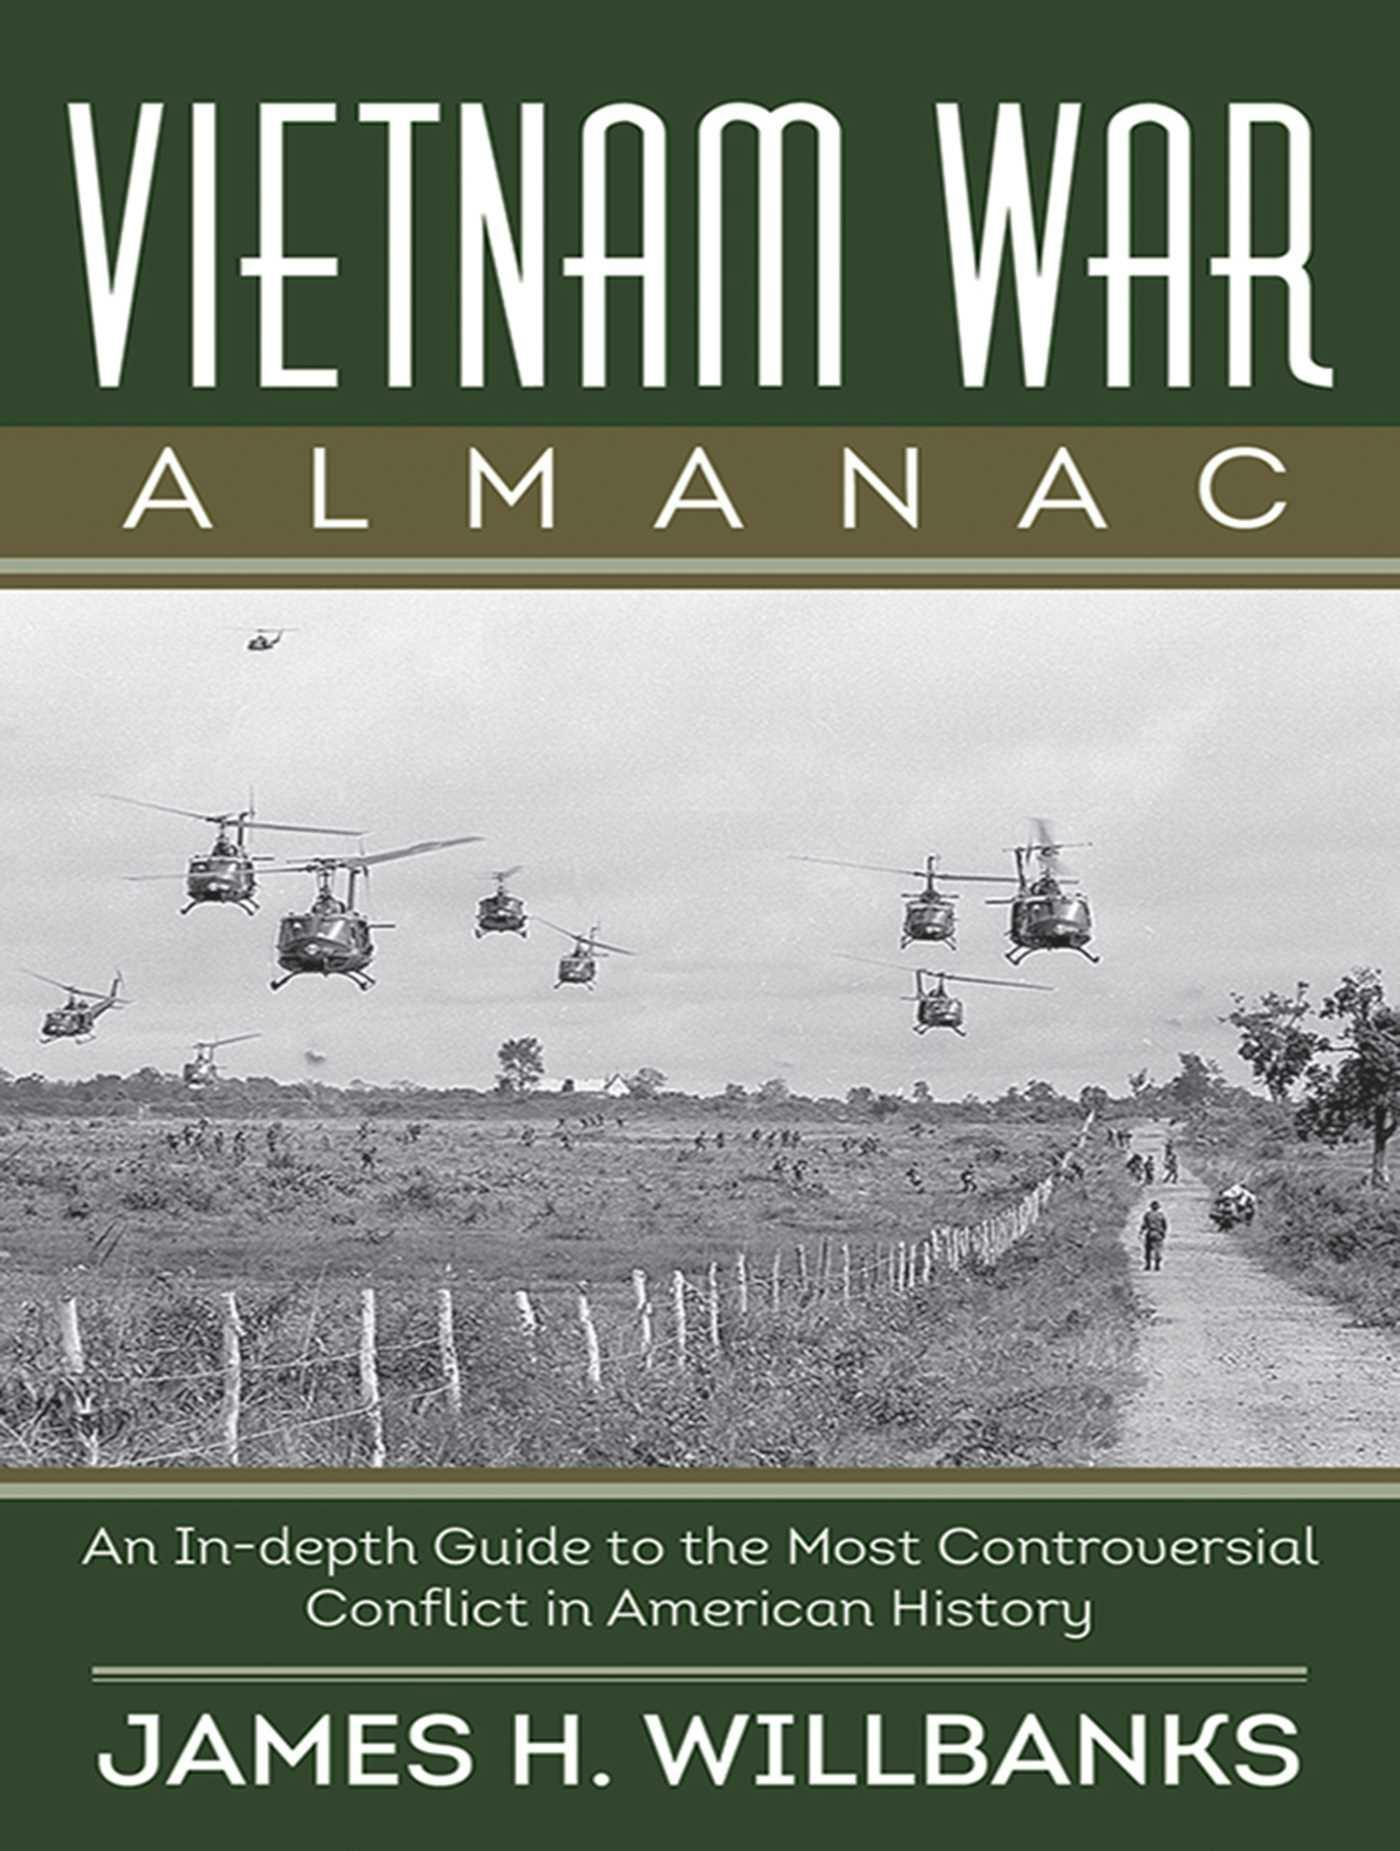 Vietnam War Almanac: An In-Depth Guide to the Most Controversial Conflict in American History - James H. Willbanks